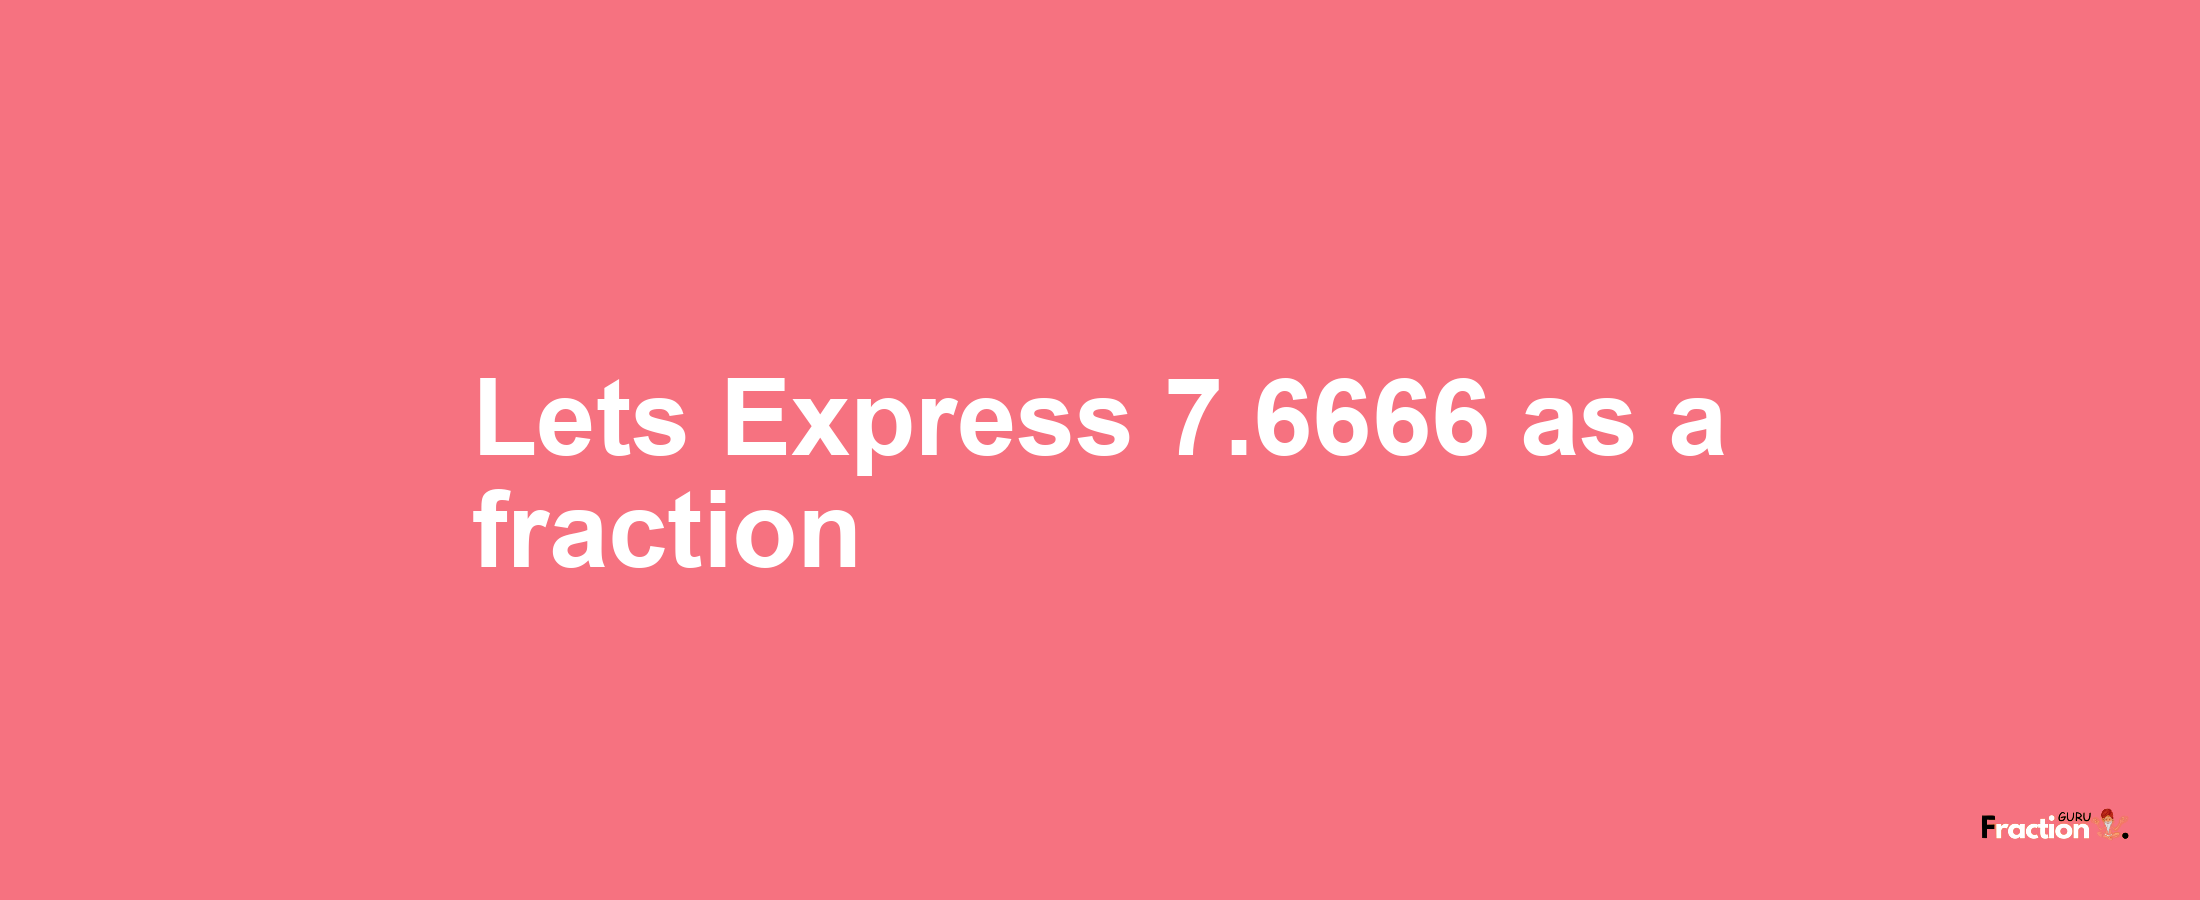 Lets Express 7.6666 as afraction